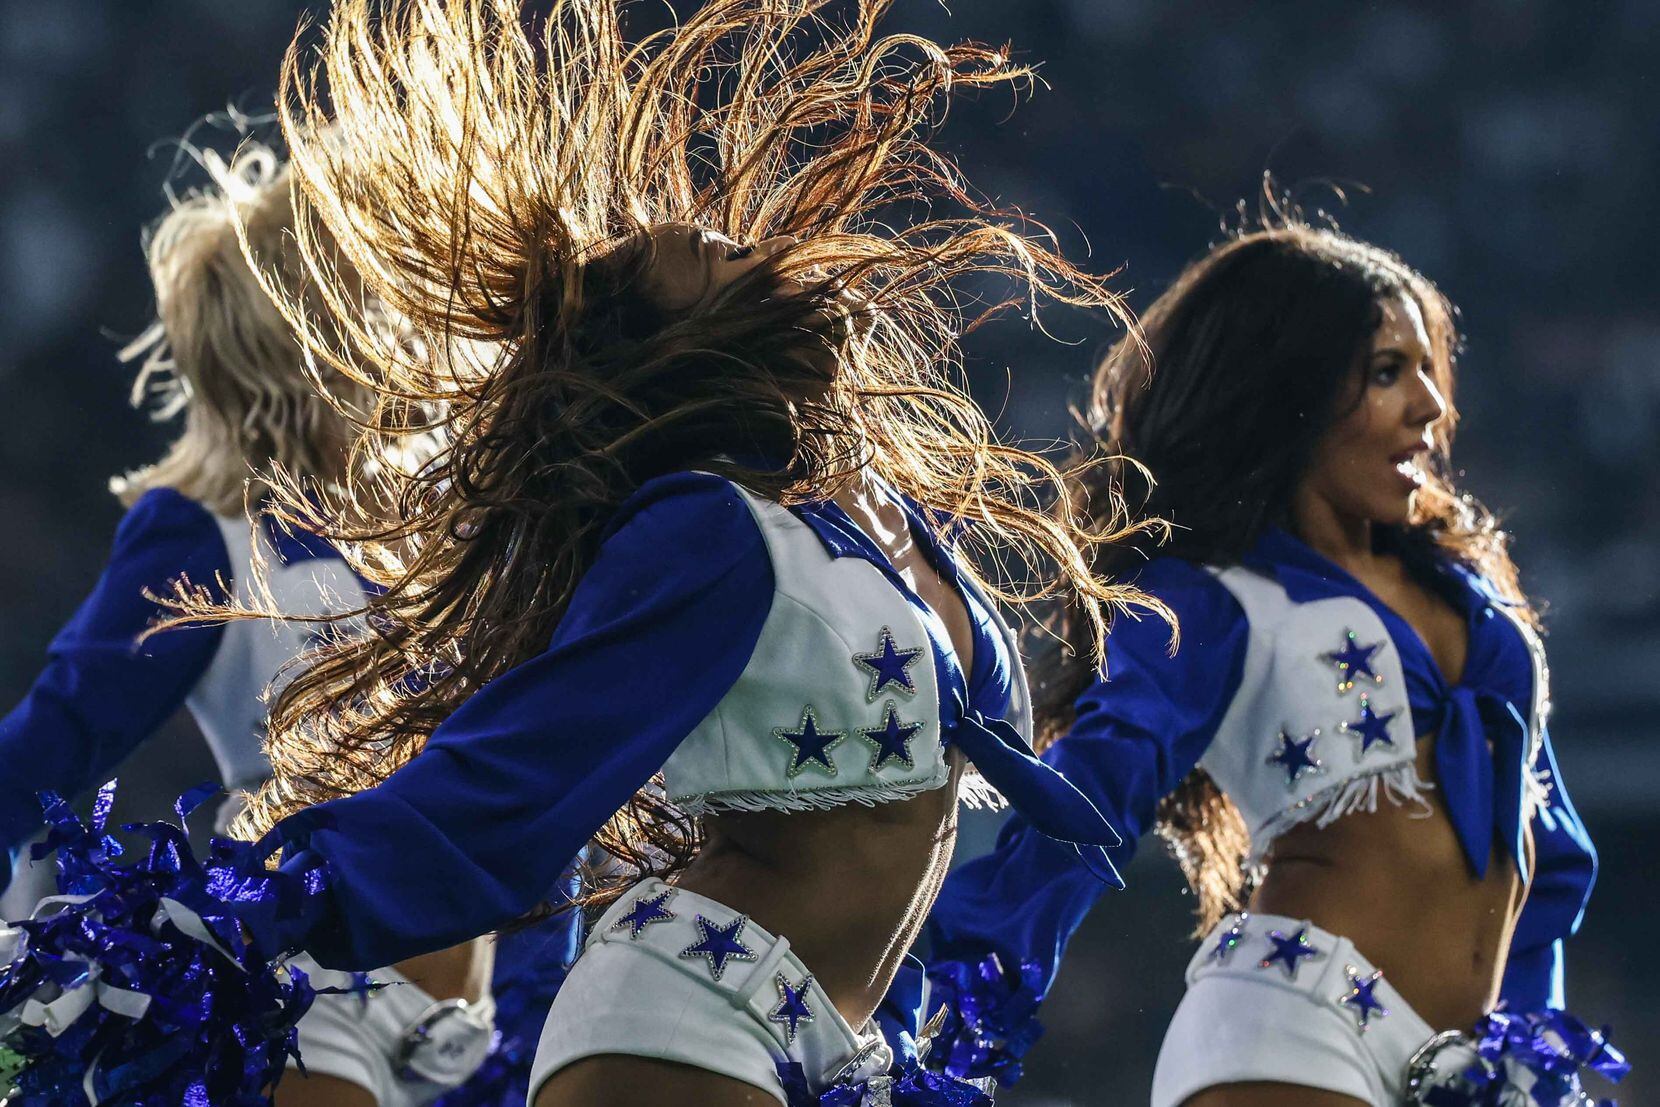 Dallas Cowboys' cheerleaders dance during the 4th quarter of the game against New York Giants at AT&T stadium in Arlington on Sunday, October 10, 2021. 